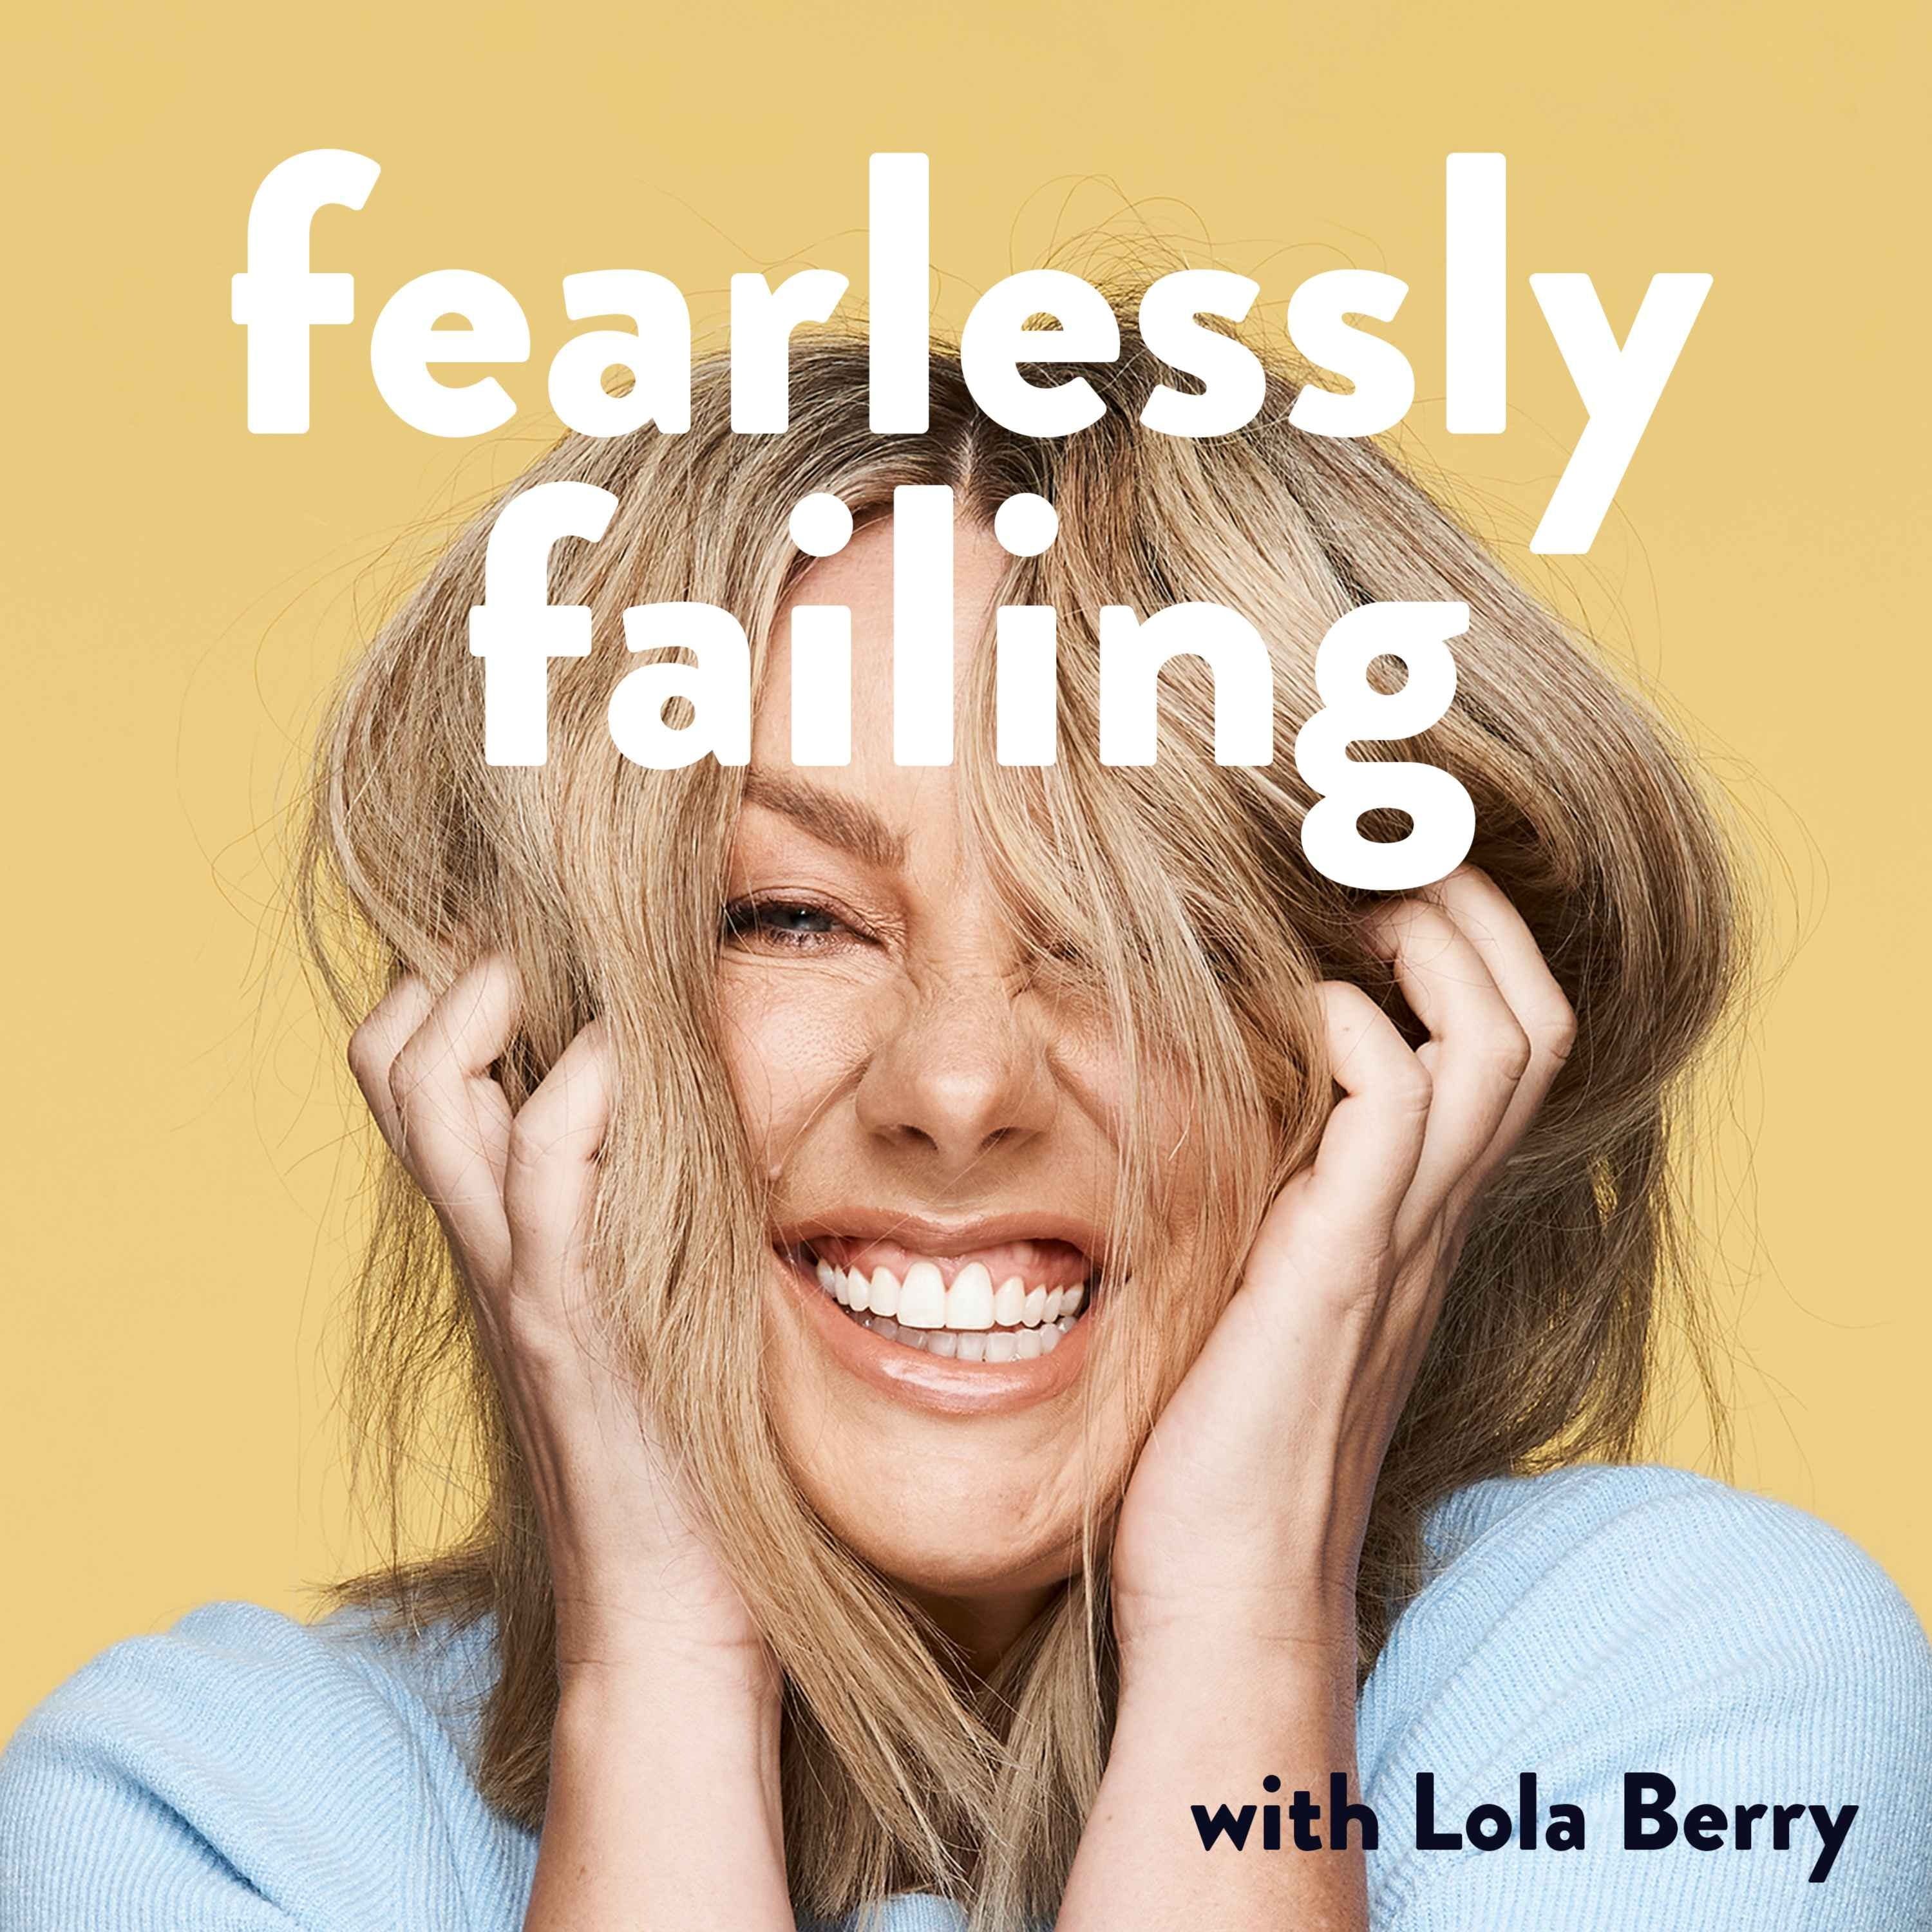 363. Fearlessly Failing : Dr Stephen Elgey - IVF Specialist